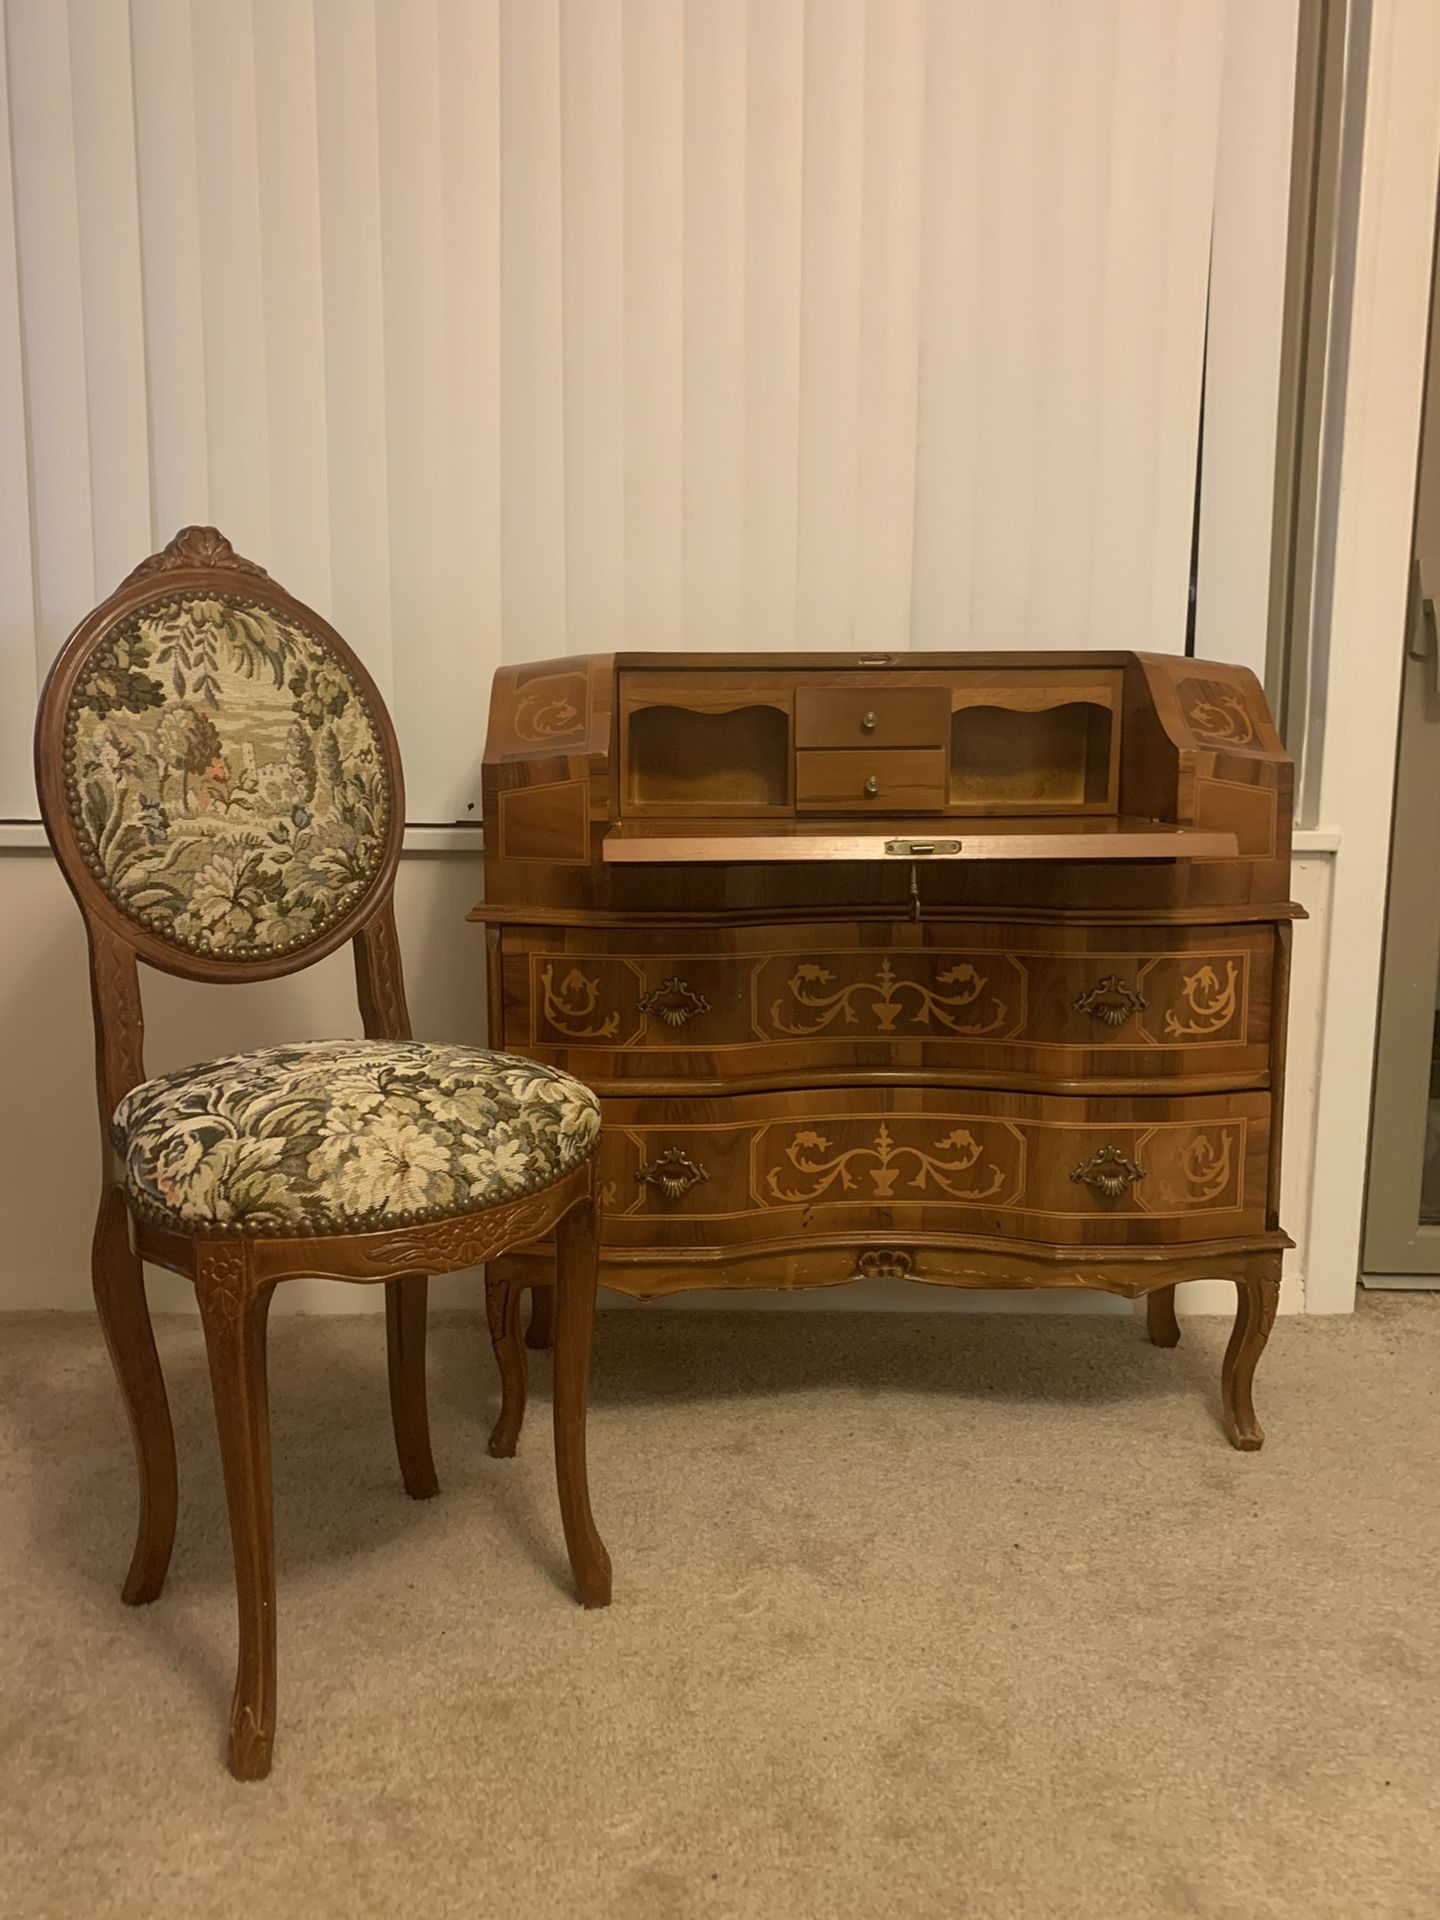 Antique secretary desk with hutch and chair